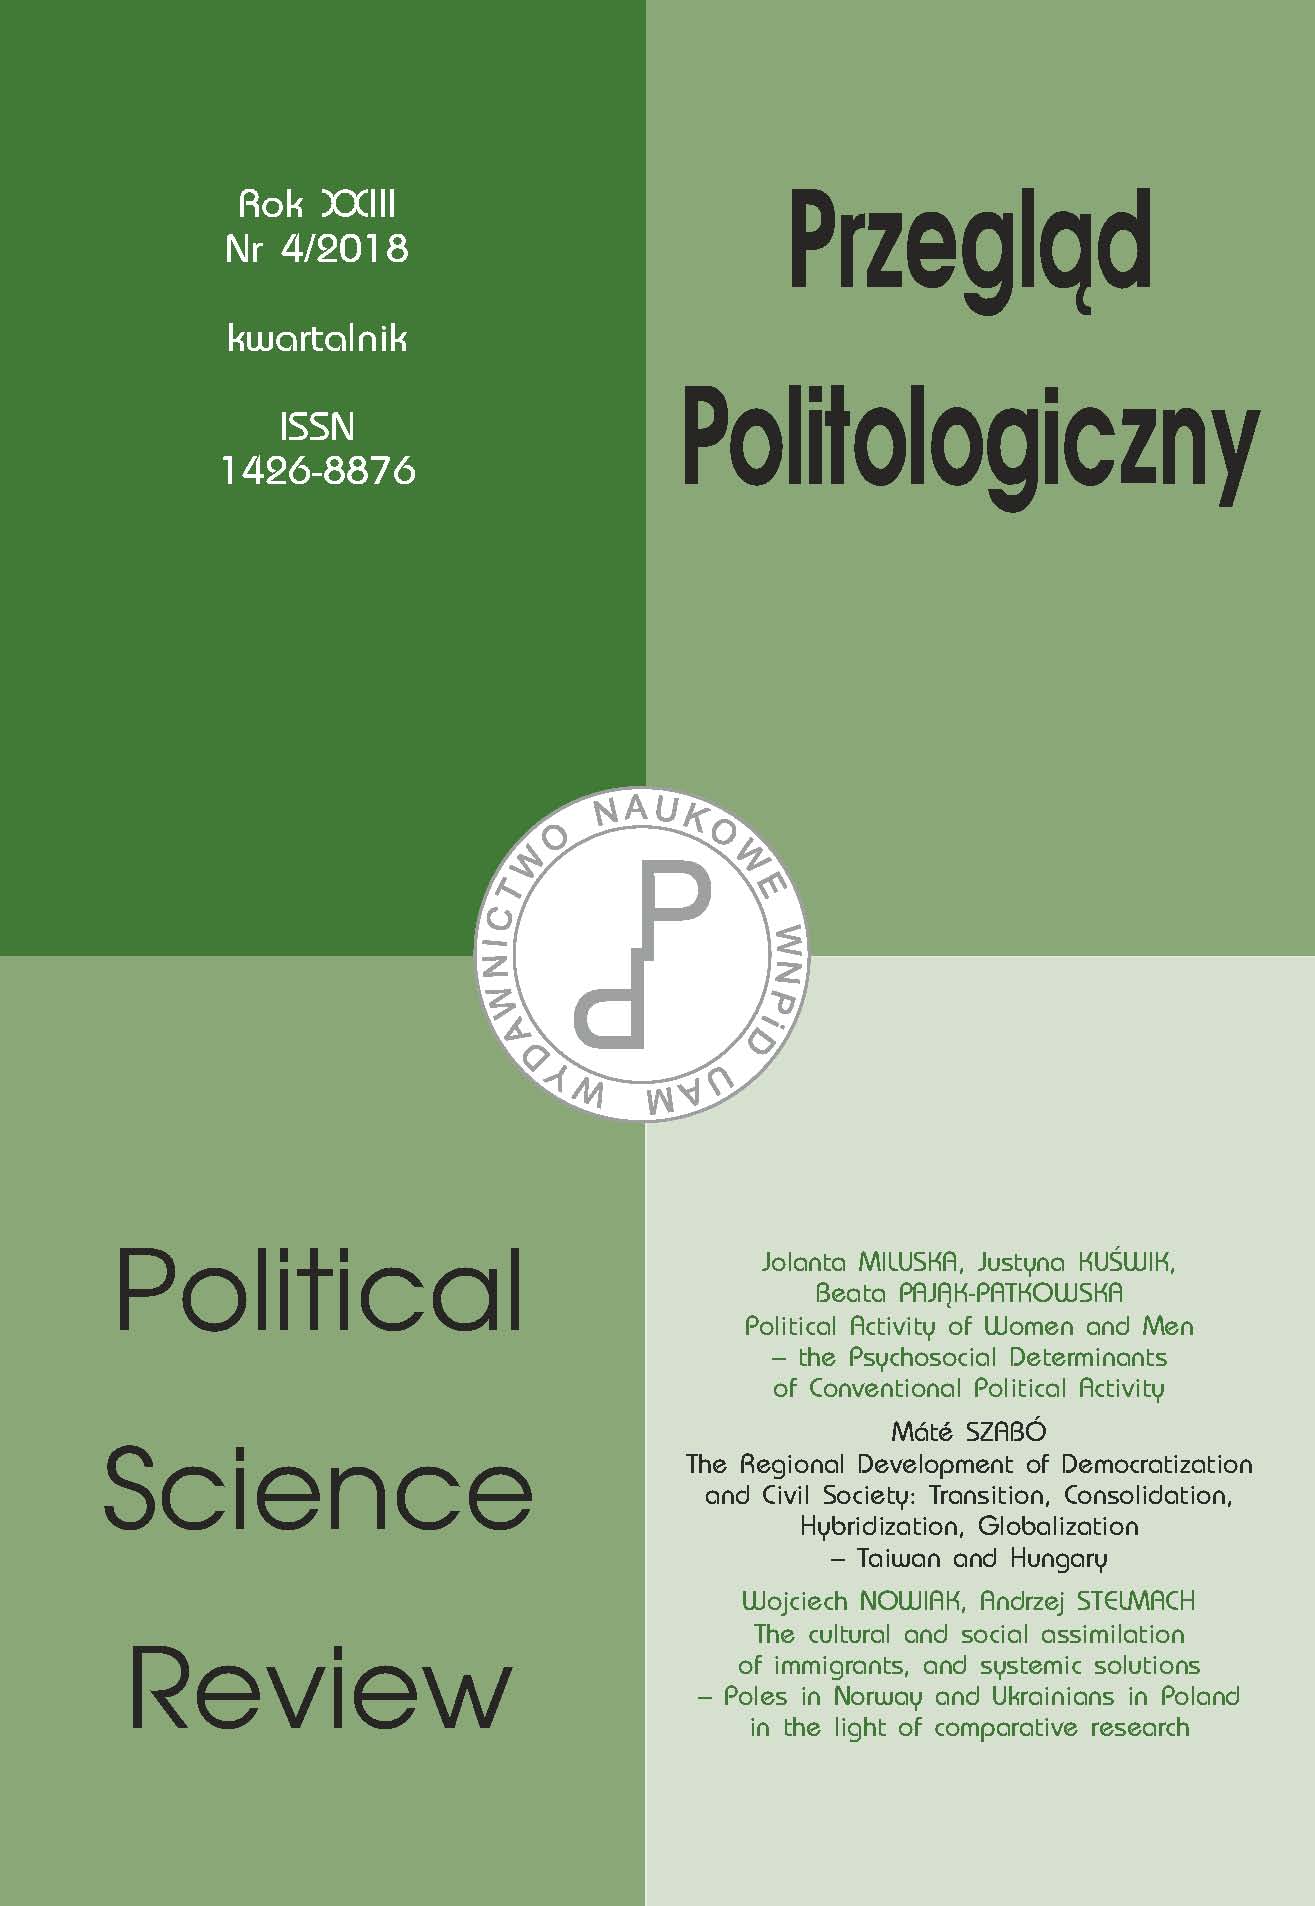 The cultural and social assimilation of immigrants, and systemic solutions - Poles in Norway and Ukrainians in Poland in the light of comparative research Cover Image